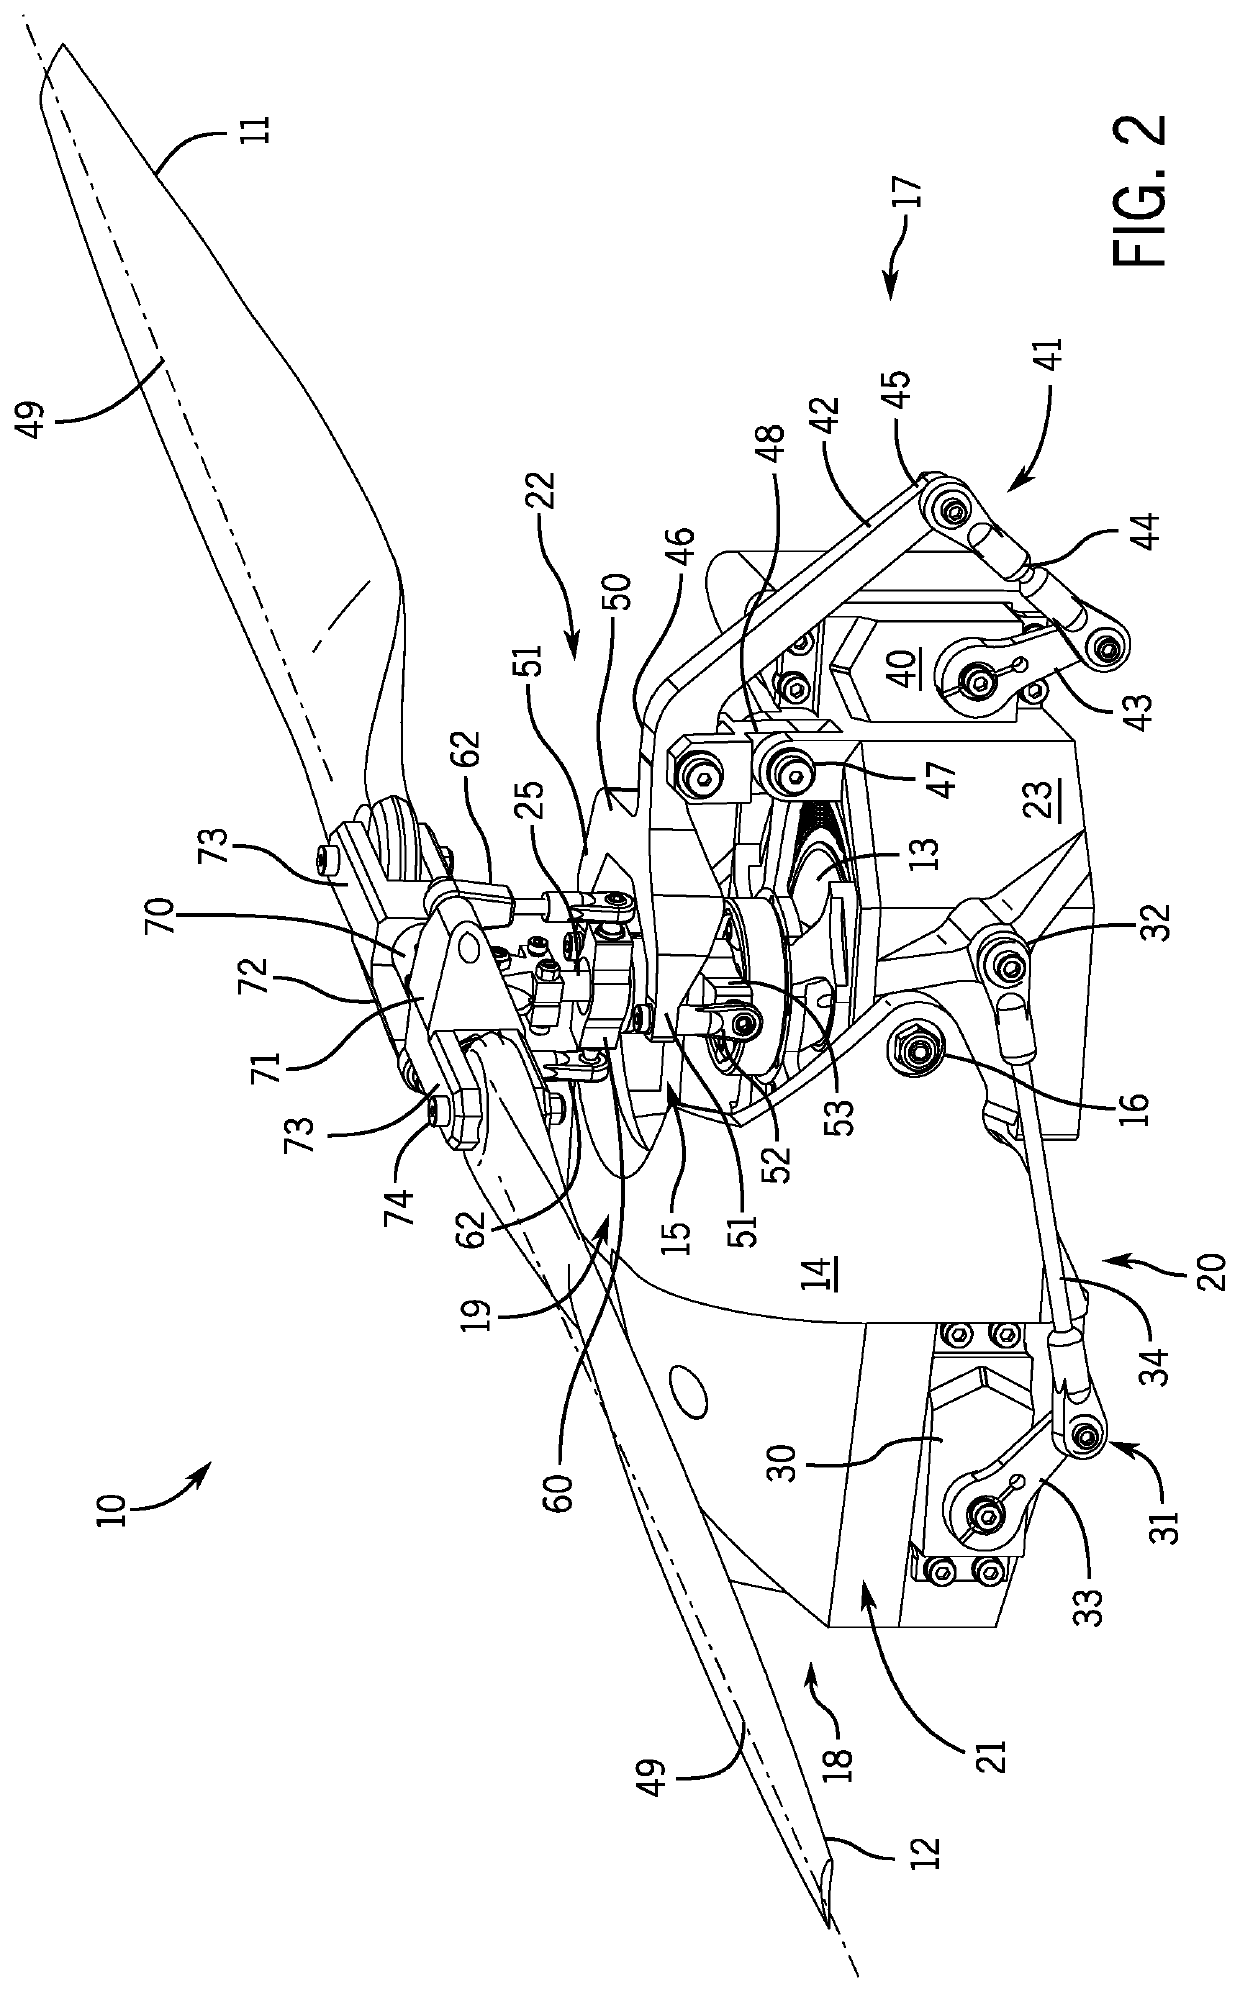 Apparatus with Variable Pitch and Continuous Tilt for Rotors on an Unmanned Fixed Wing Aircraft